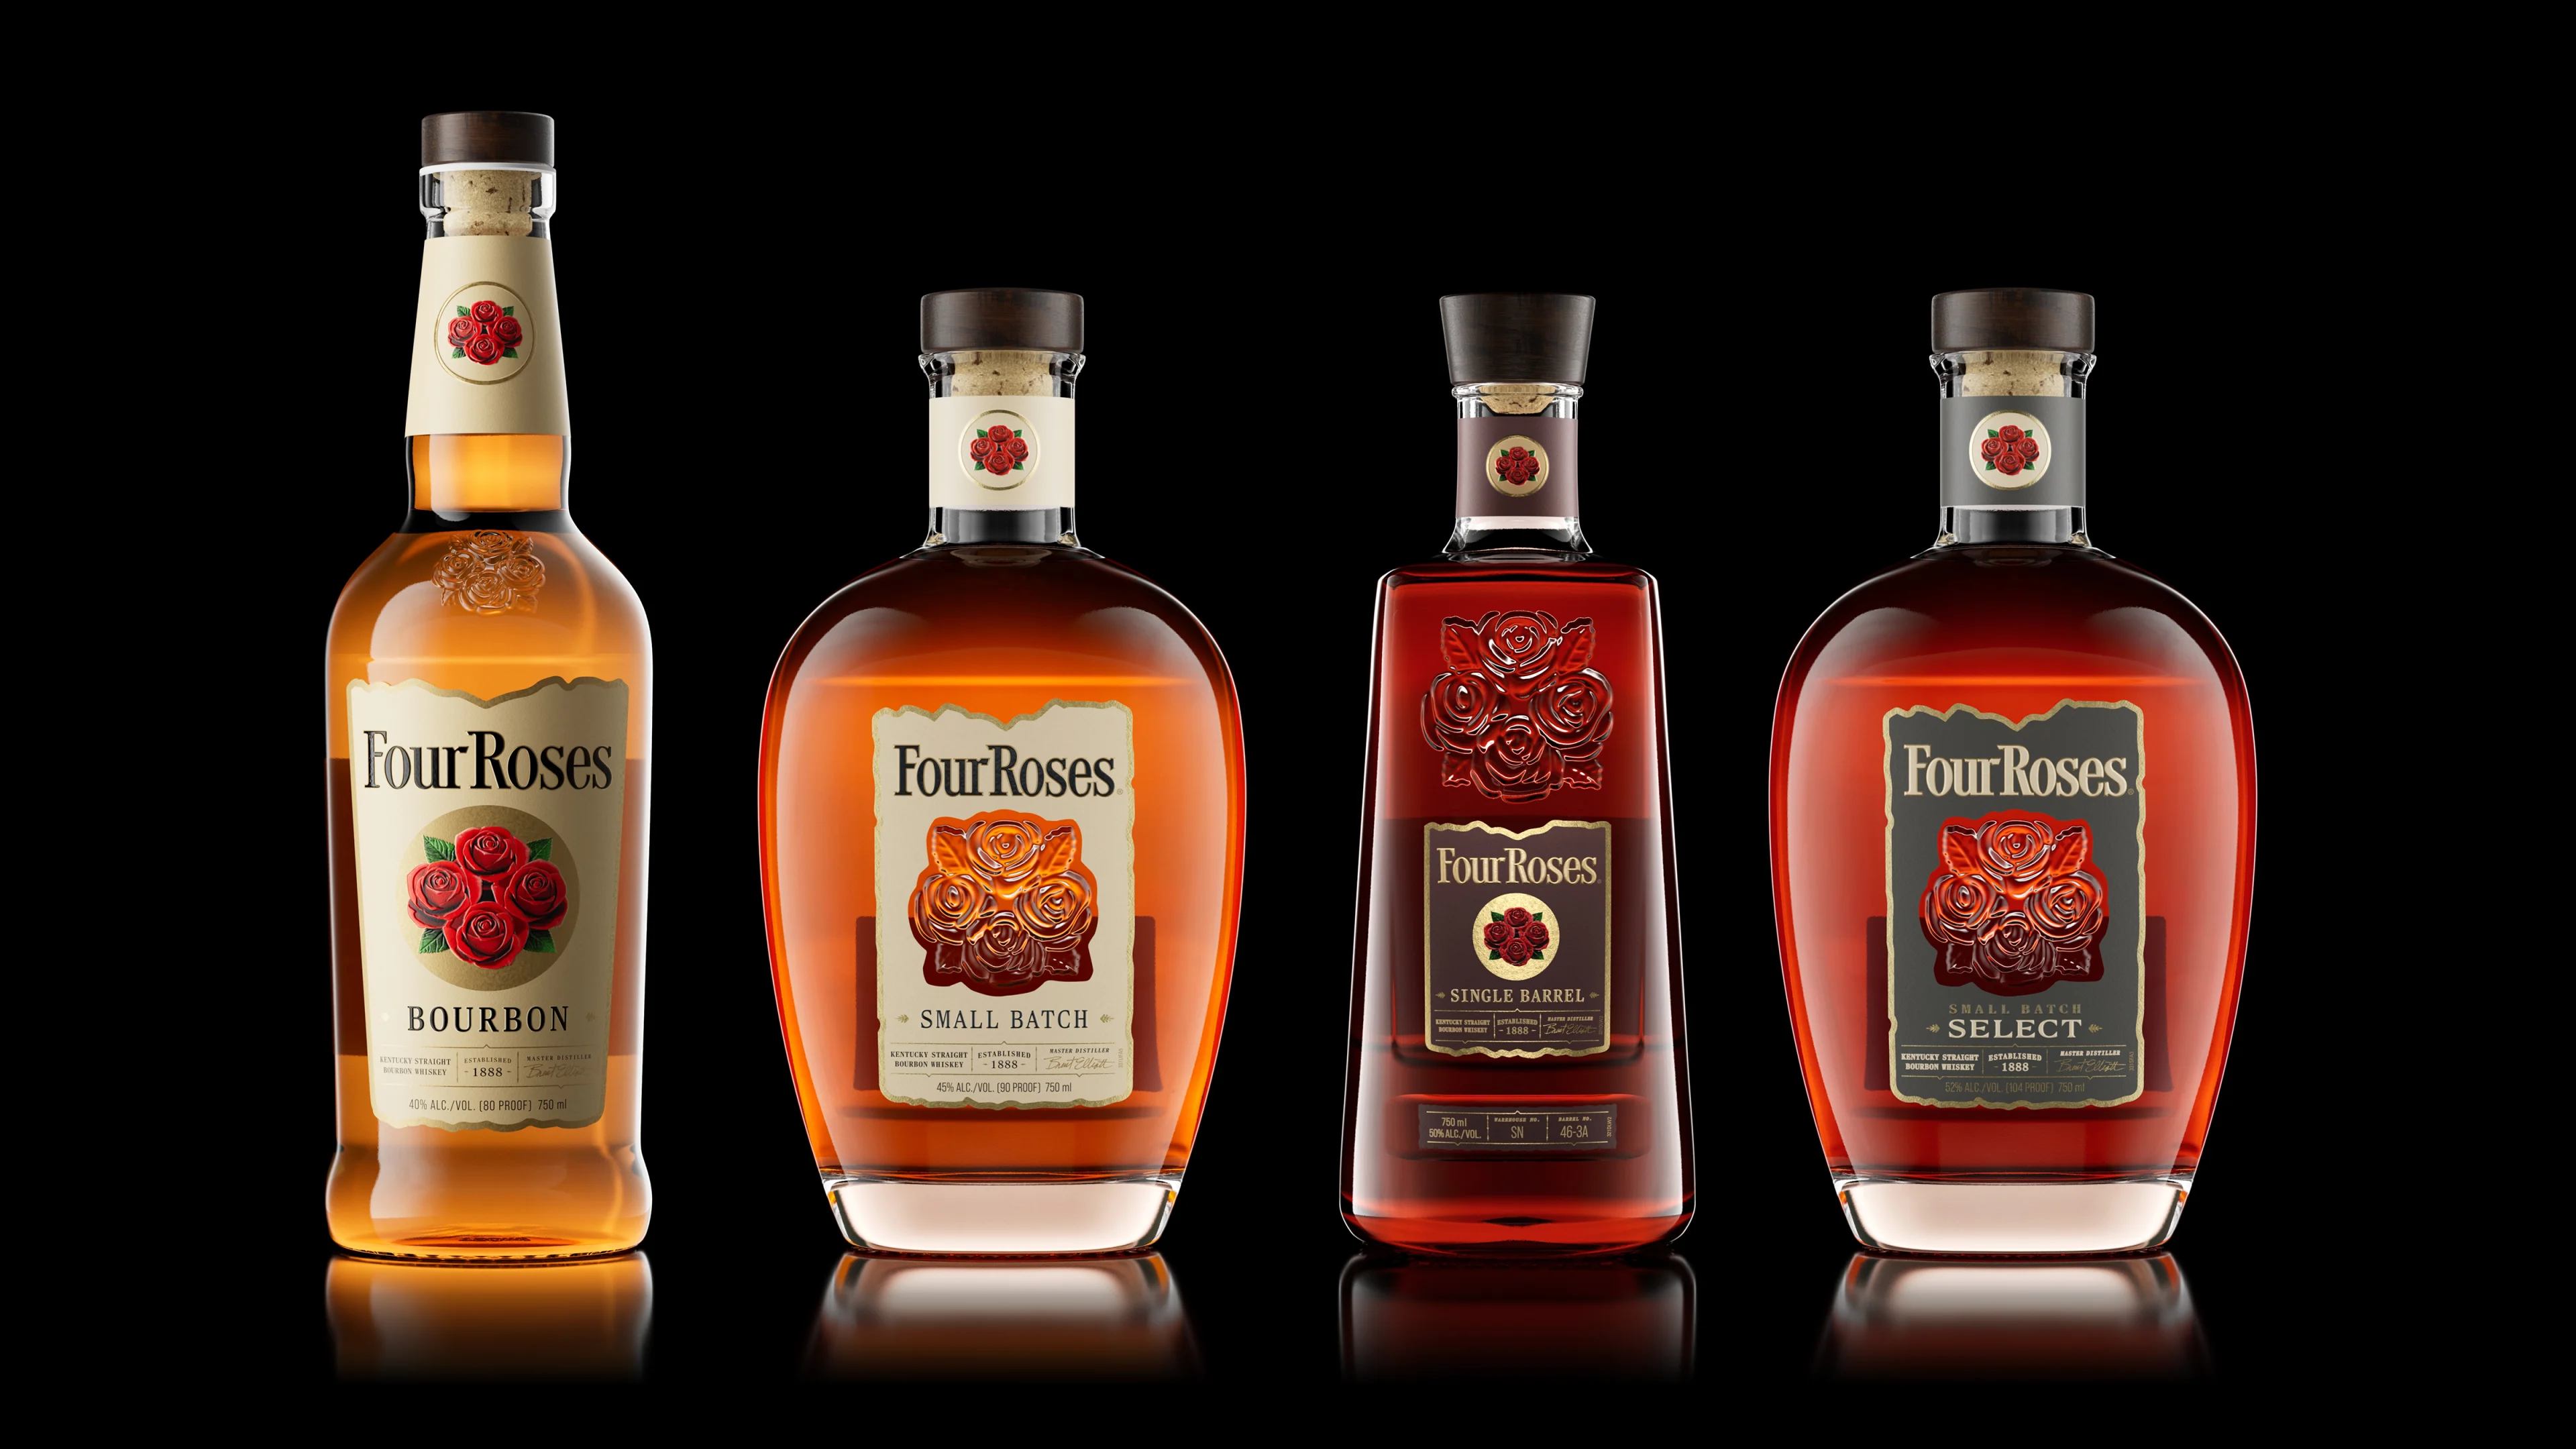 Lineup of Four Roses bourbon bottles: Bourbon, Small Batch, Single Barrel, and Small Batch Select